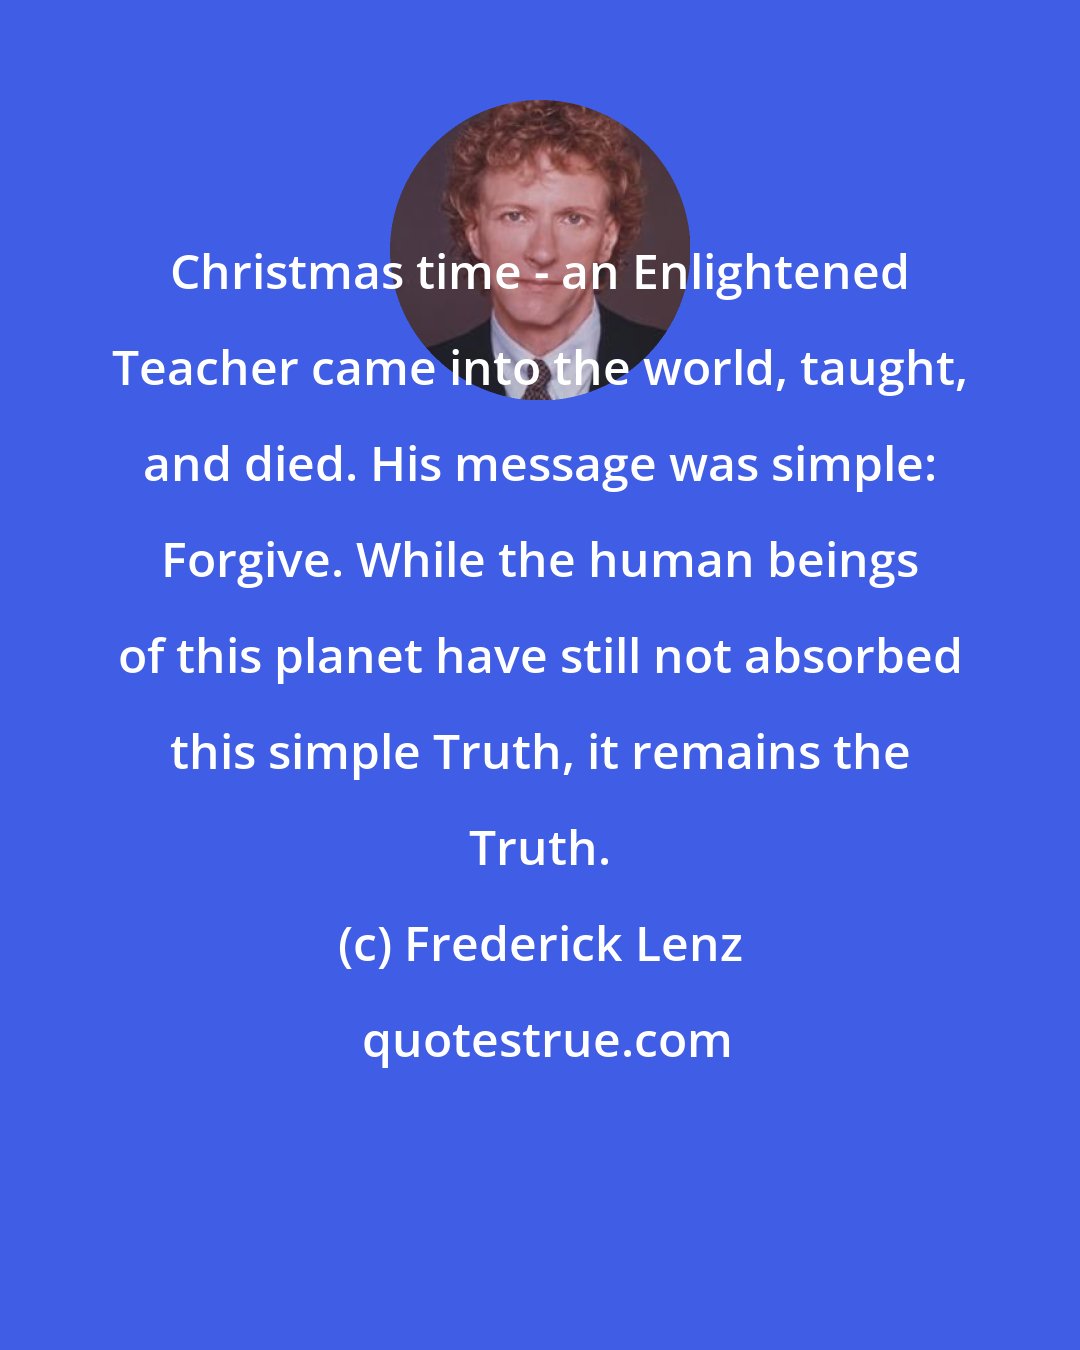 Frederick Lenz: Christmas time - an Enlightened Teacher came into the world, taught, and died. His message was simple: Forgive. While the human beings of this planet have still not absorbed this simple Truth, it remains the Truth.